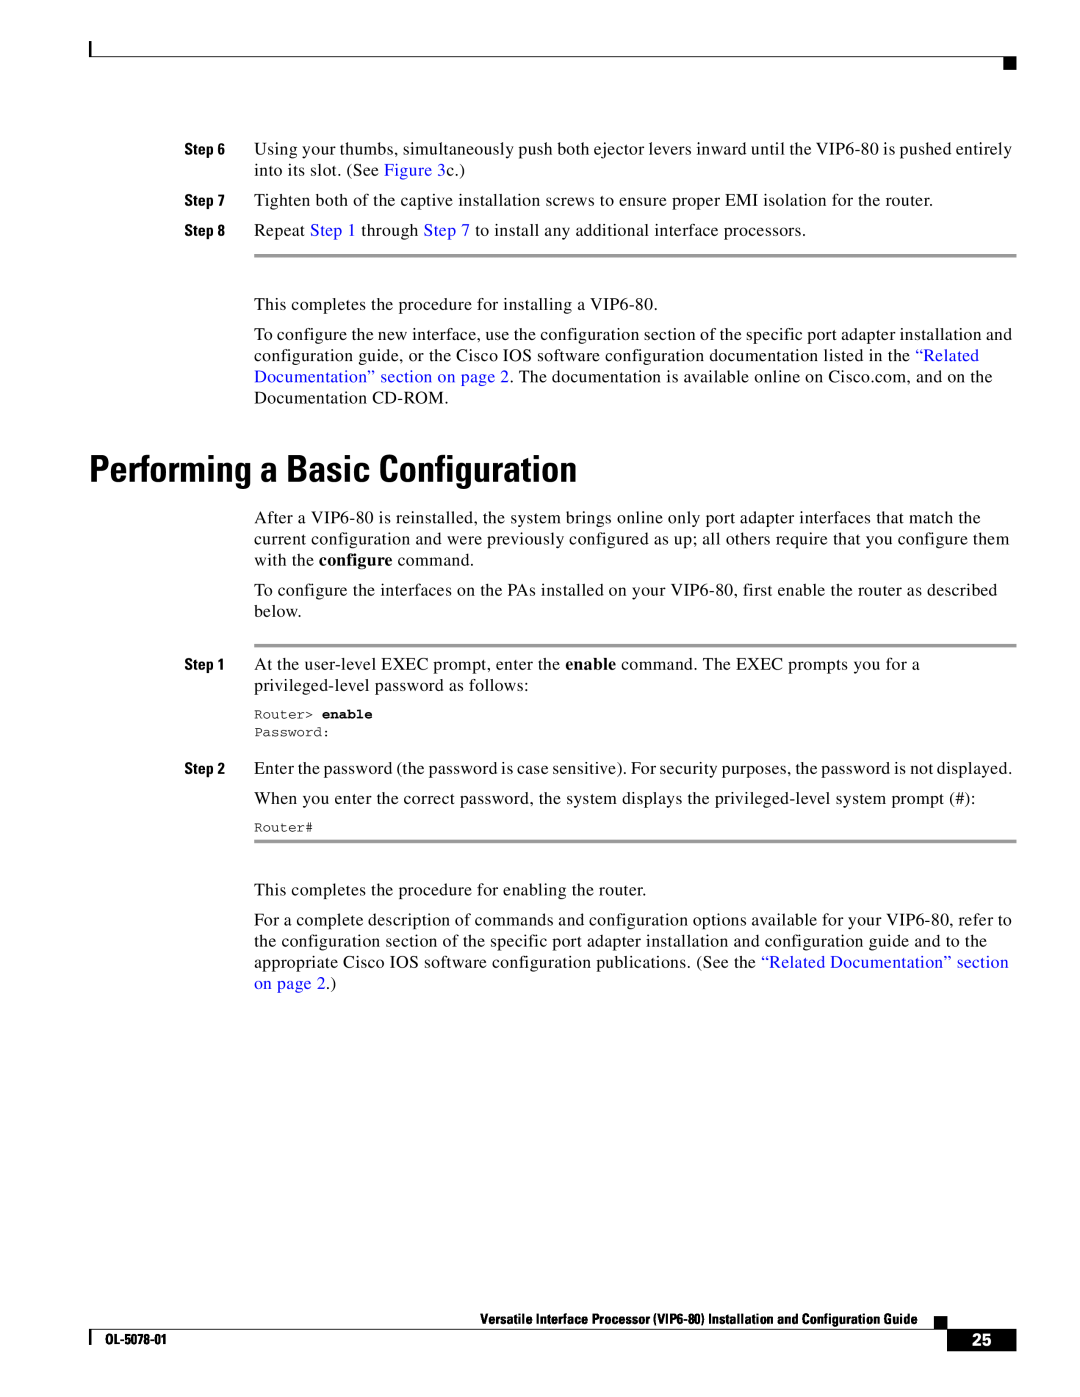 Cisco Systems (VIP6-80) manual Performing a Basic Configuration 